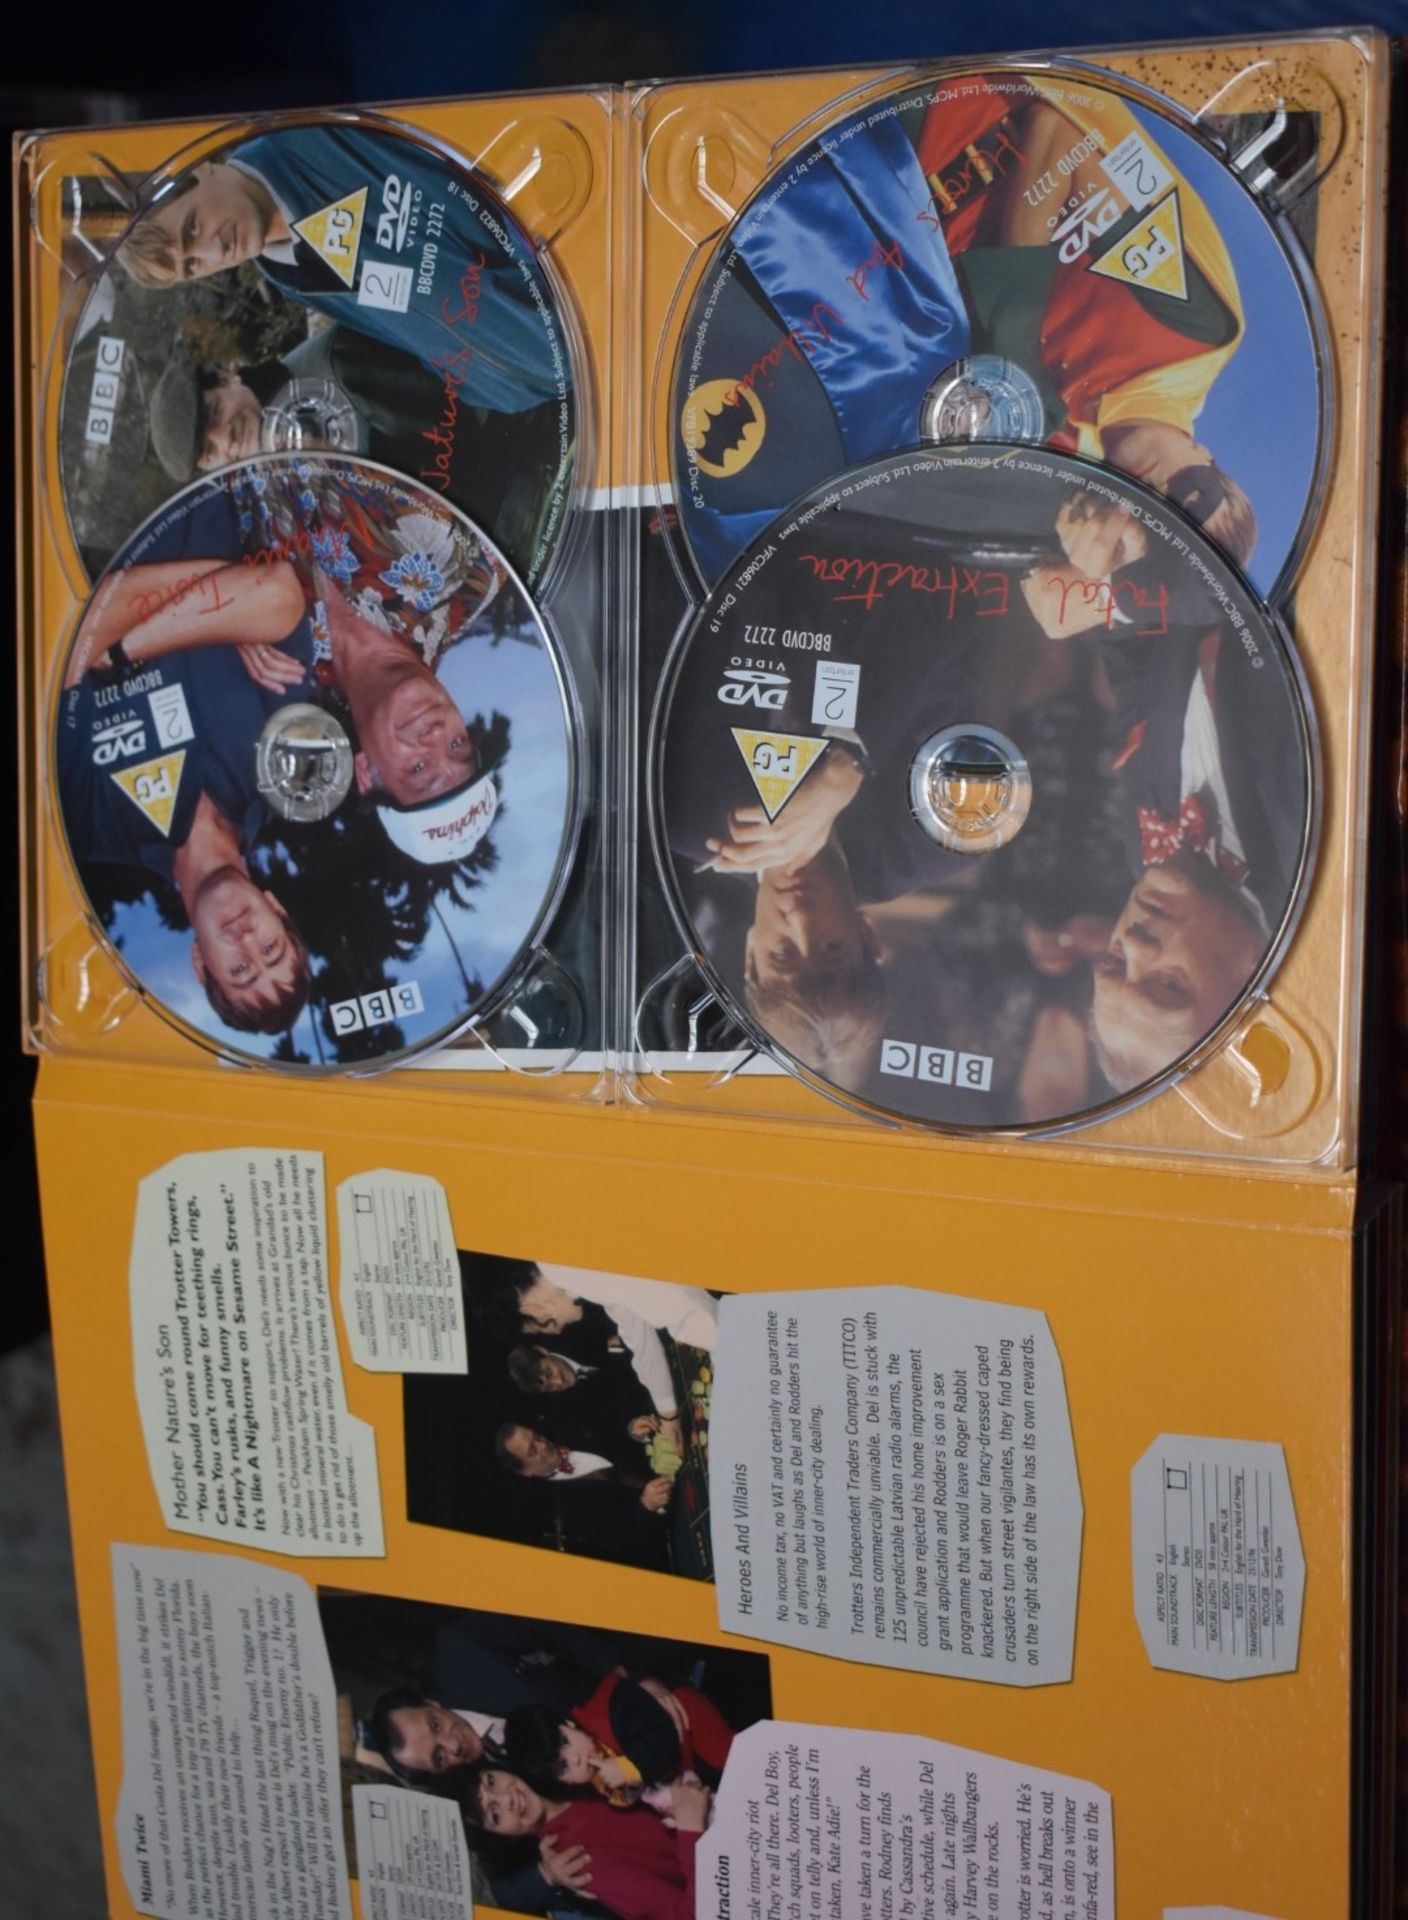 1 x Only Fools and Horses DVD Box Set - Includes 25 Discs Full of Only Fools and Horses Classics - - Image 4 of 4